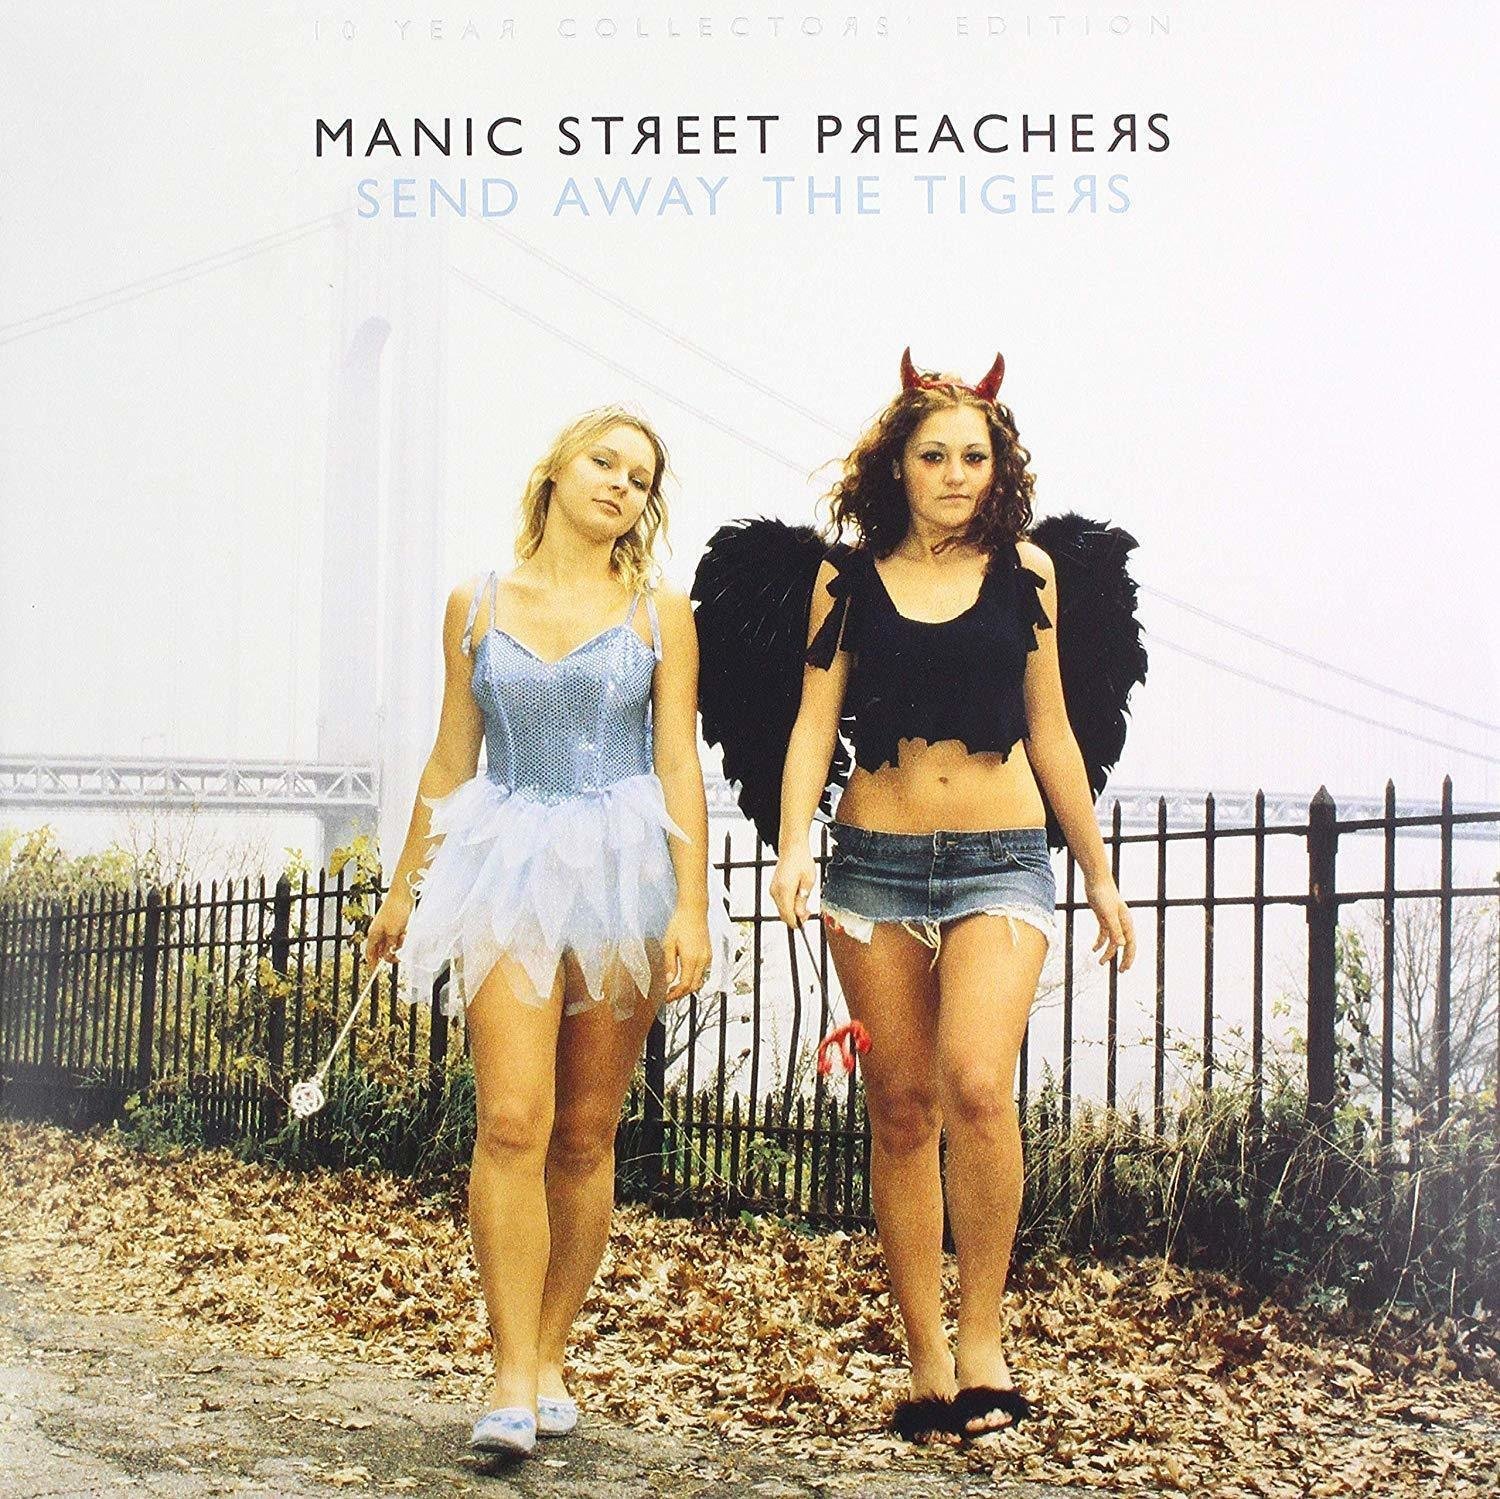 LP Manic Street Preachers Send Away the Tigers - 10 Years Collectors' Edition (2 LP)